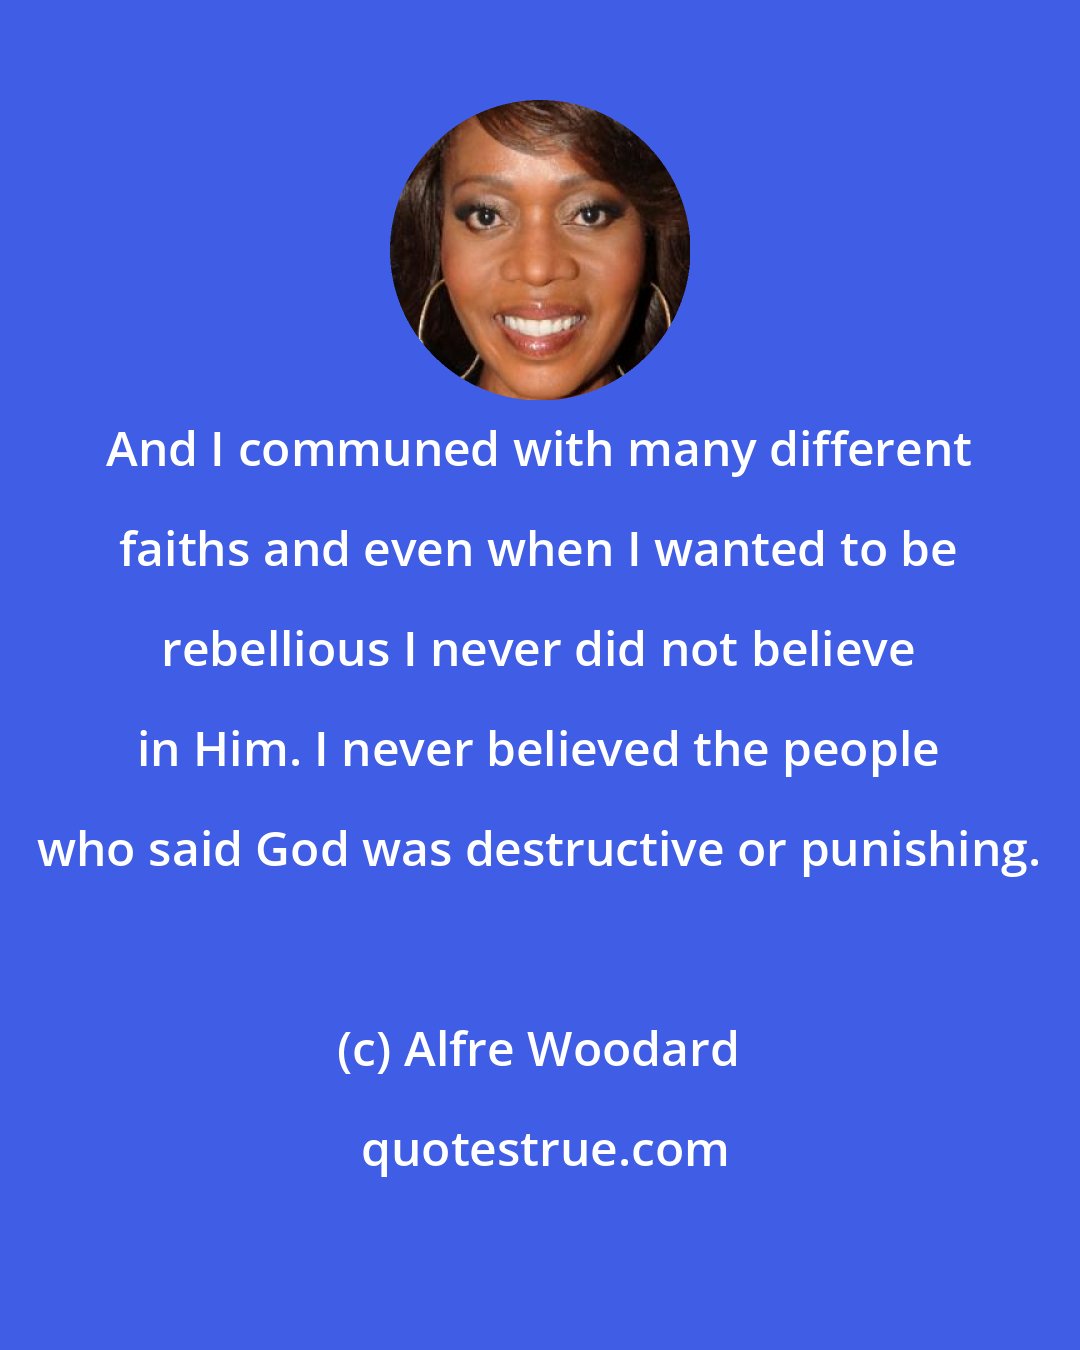 Alfre Woodard: And I communed with many different faiths and even when I wanted to be rebellious I never did not believe in Him. I never believed the people who said God was destructive or punishing.